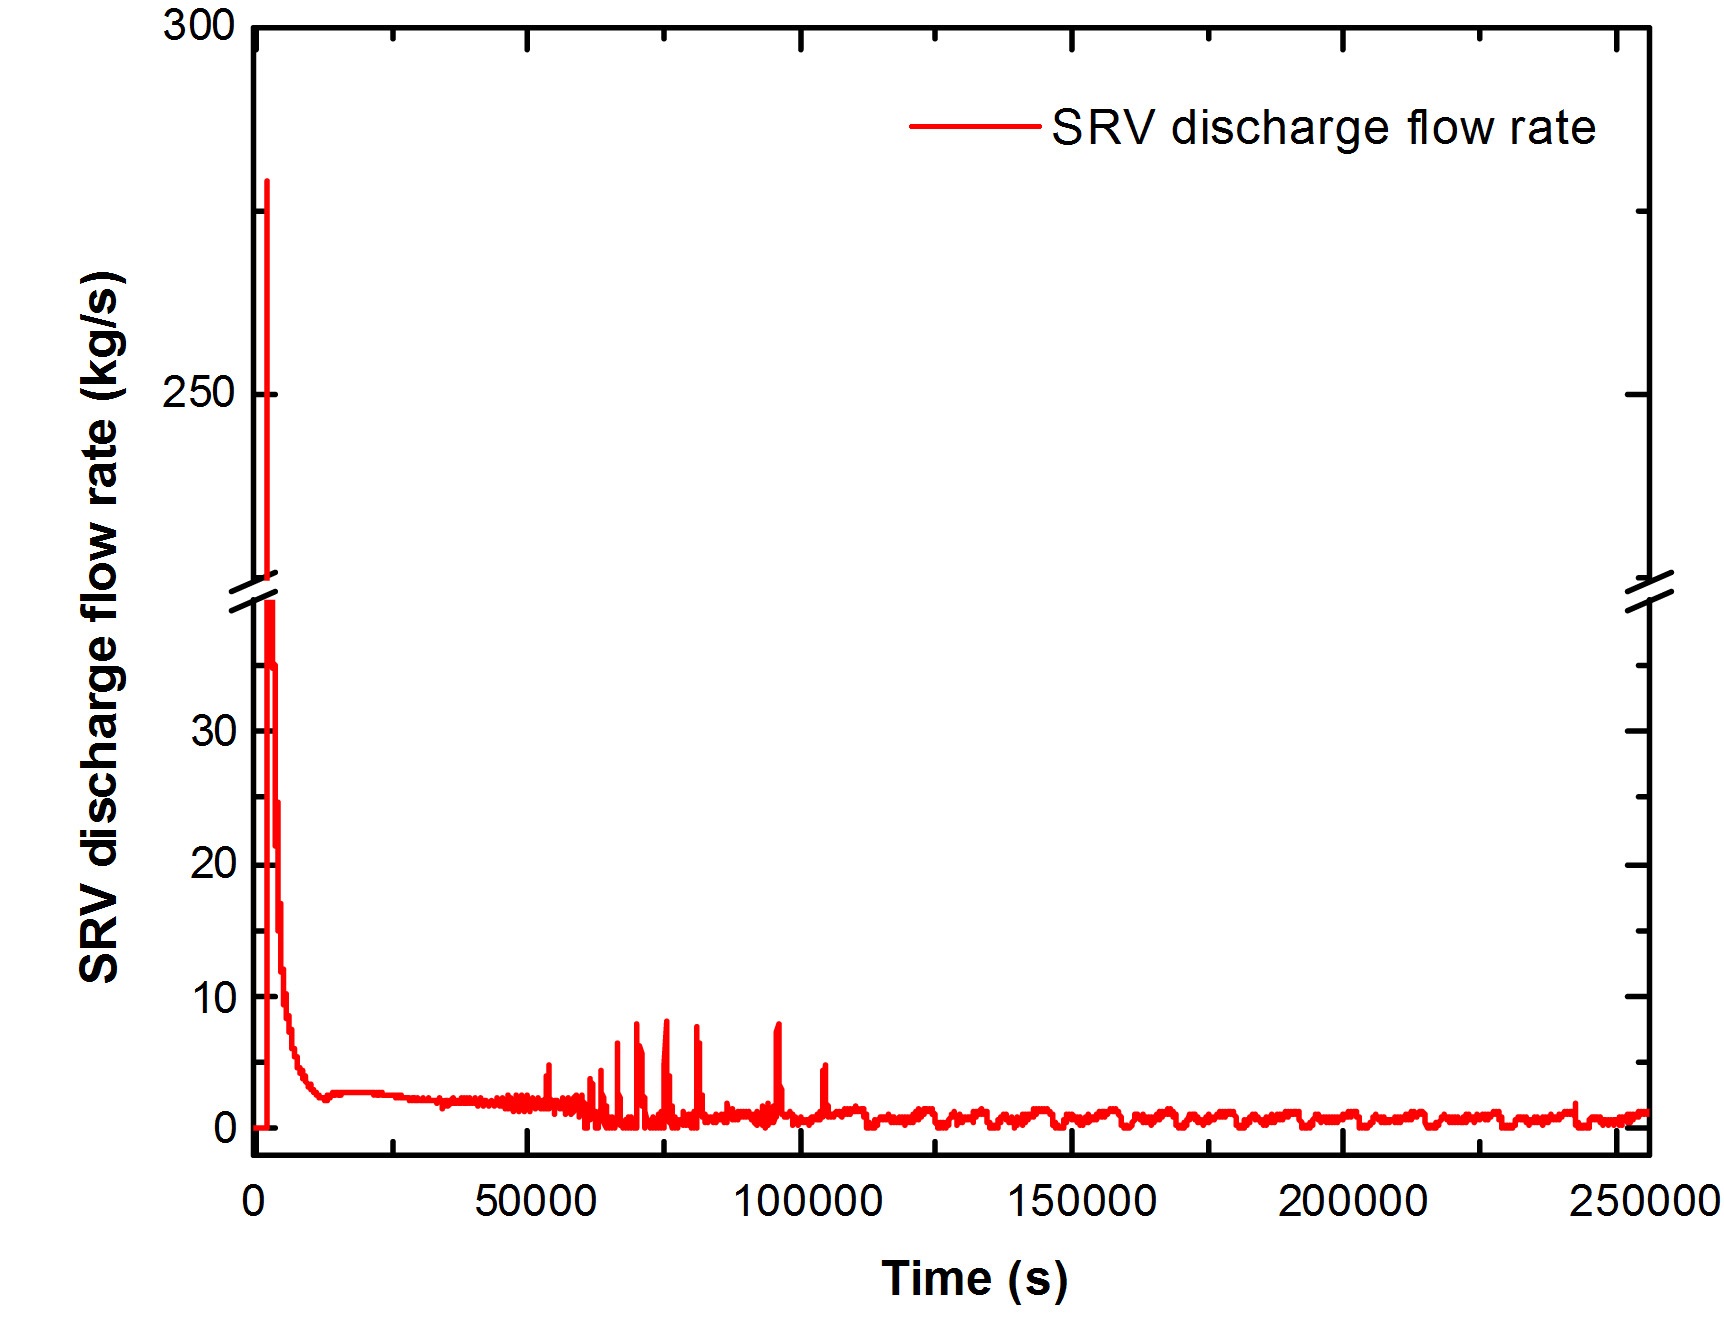 SRV Discharge Flow Rate for TMI-like Accident